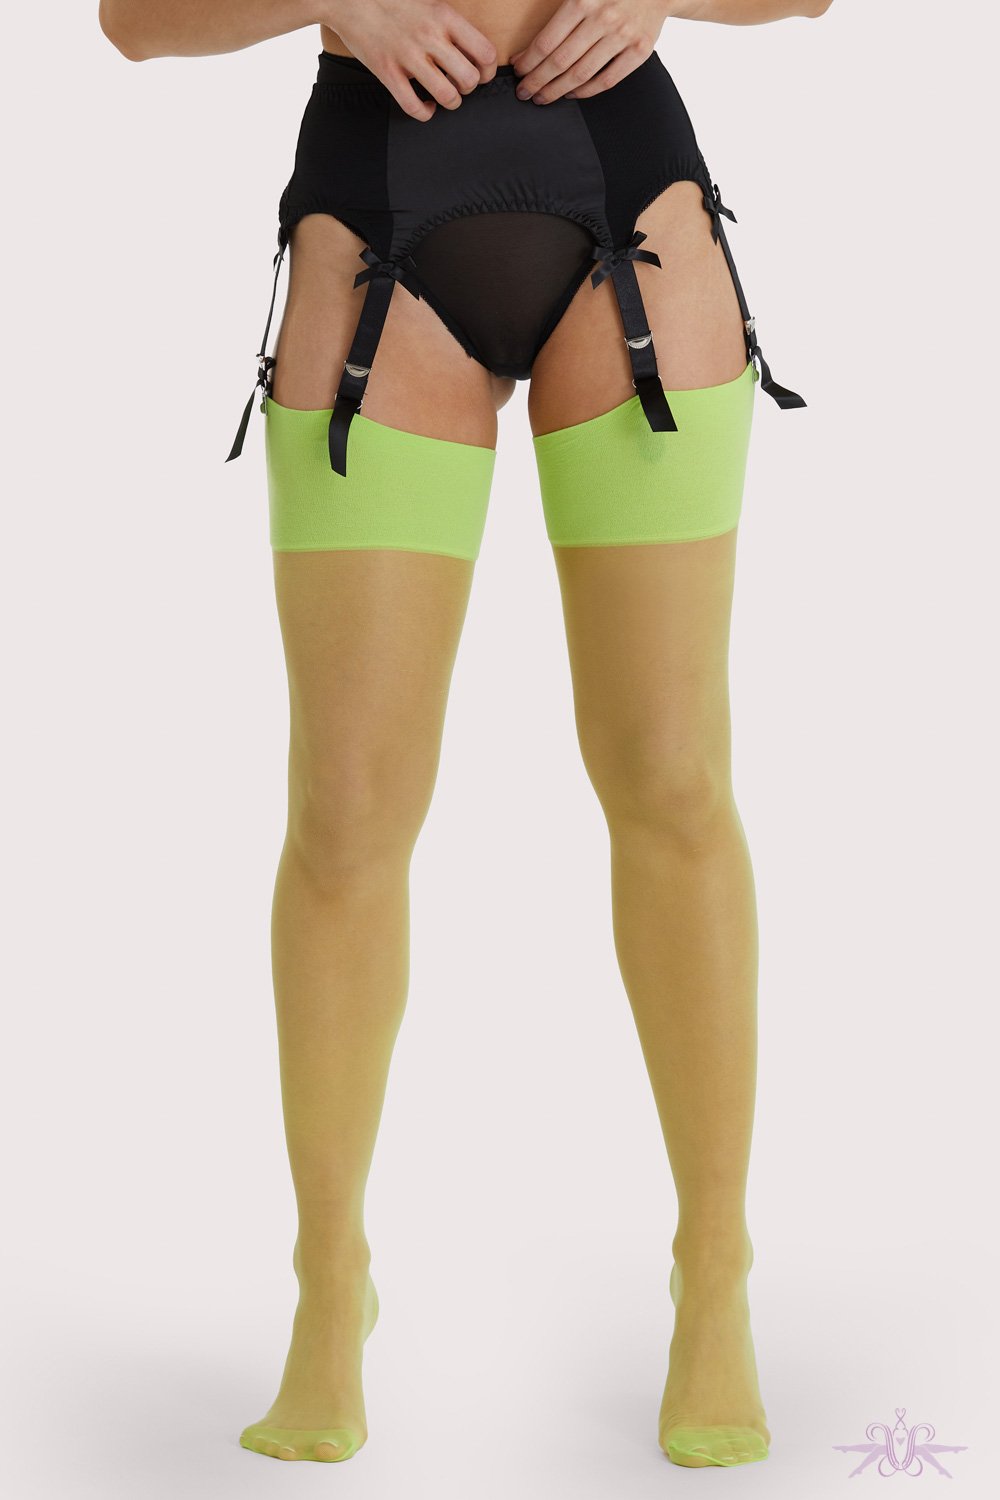 Playful Promises Lime Green Vintage Seamed Stockings